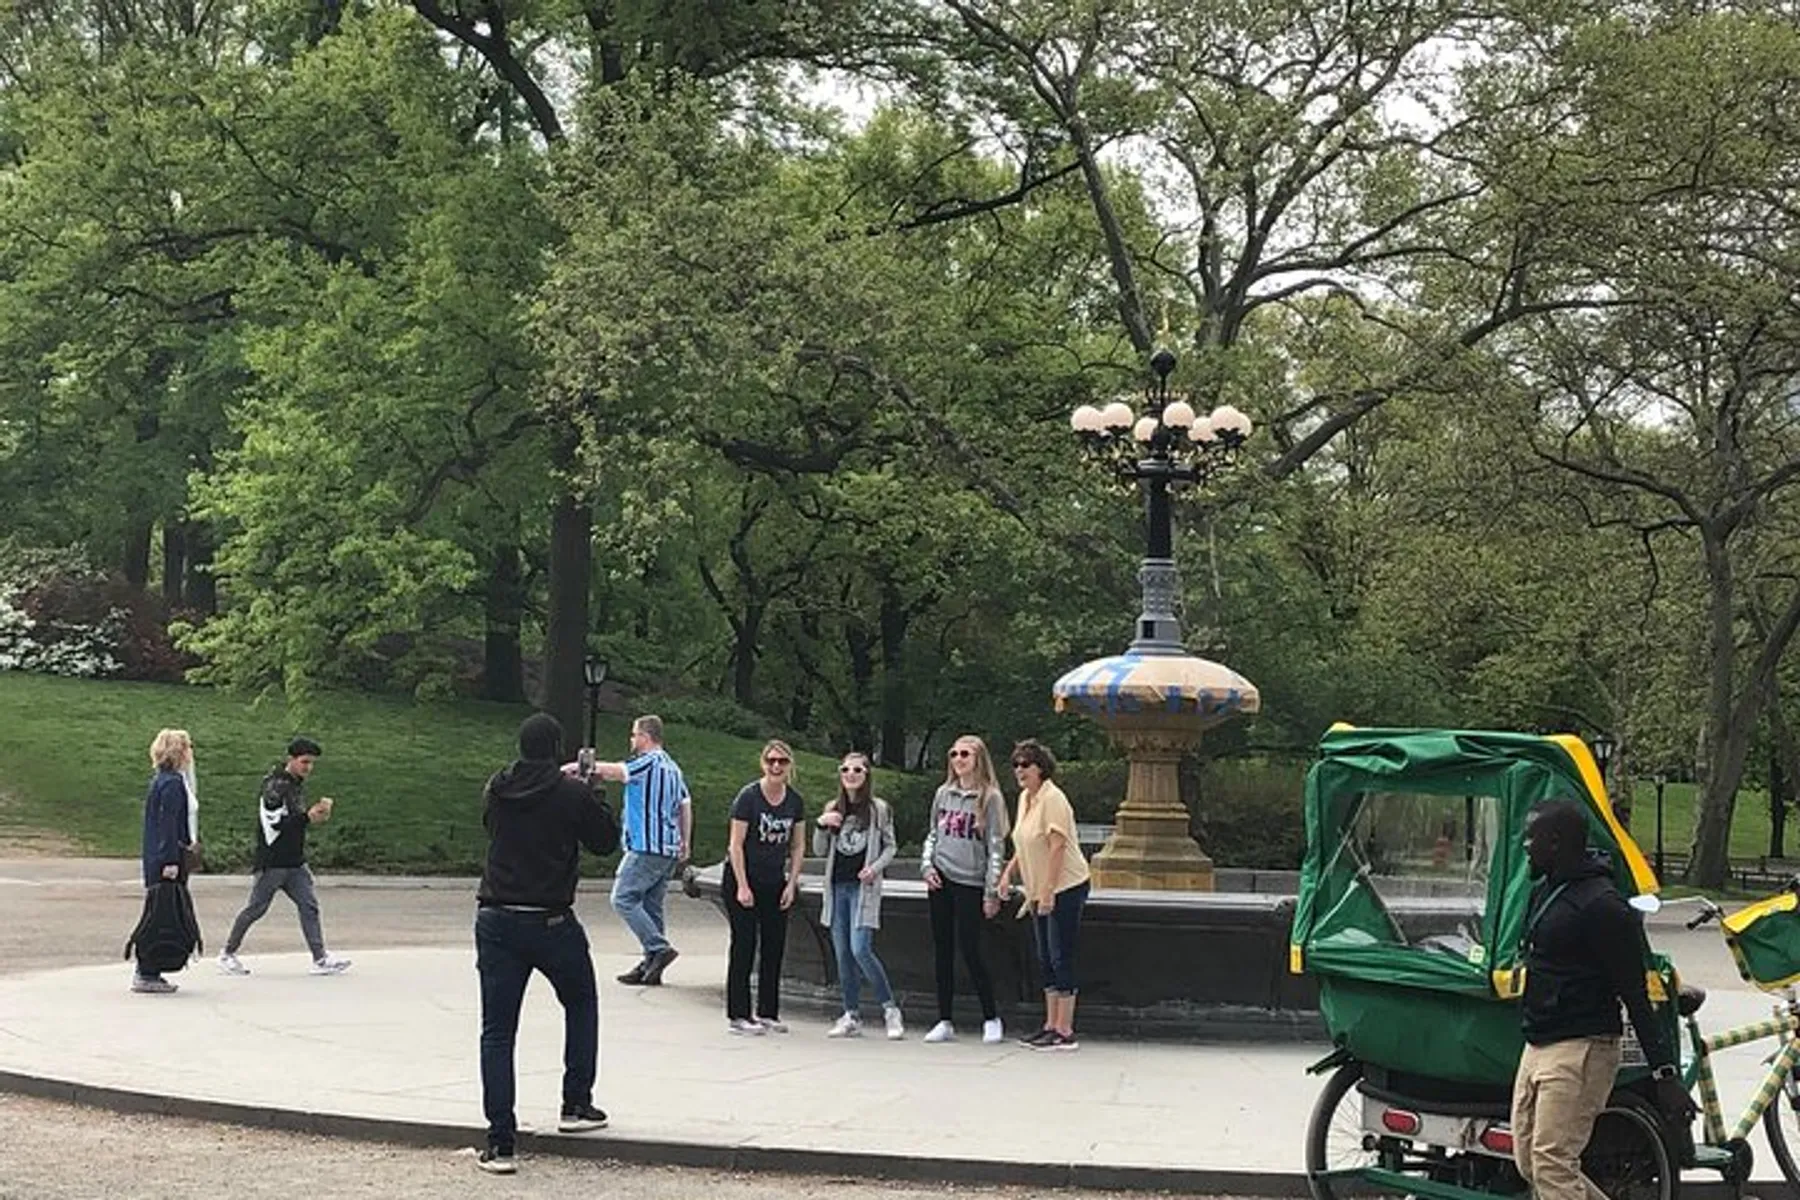 A person is taking a photo of a group next to an ornate lamp post in a park with a pedicab in the foreground and lush greenery in the background.